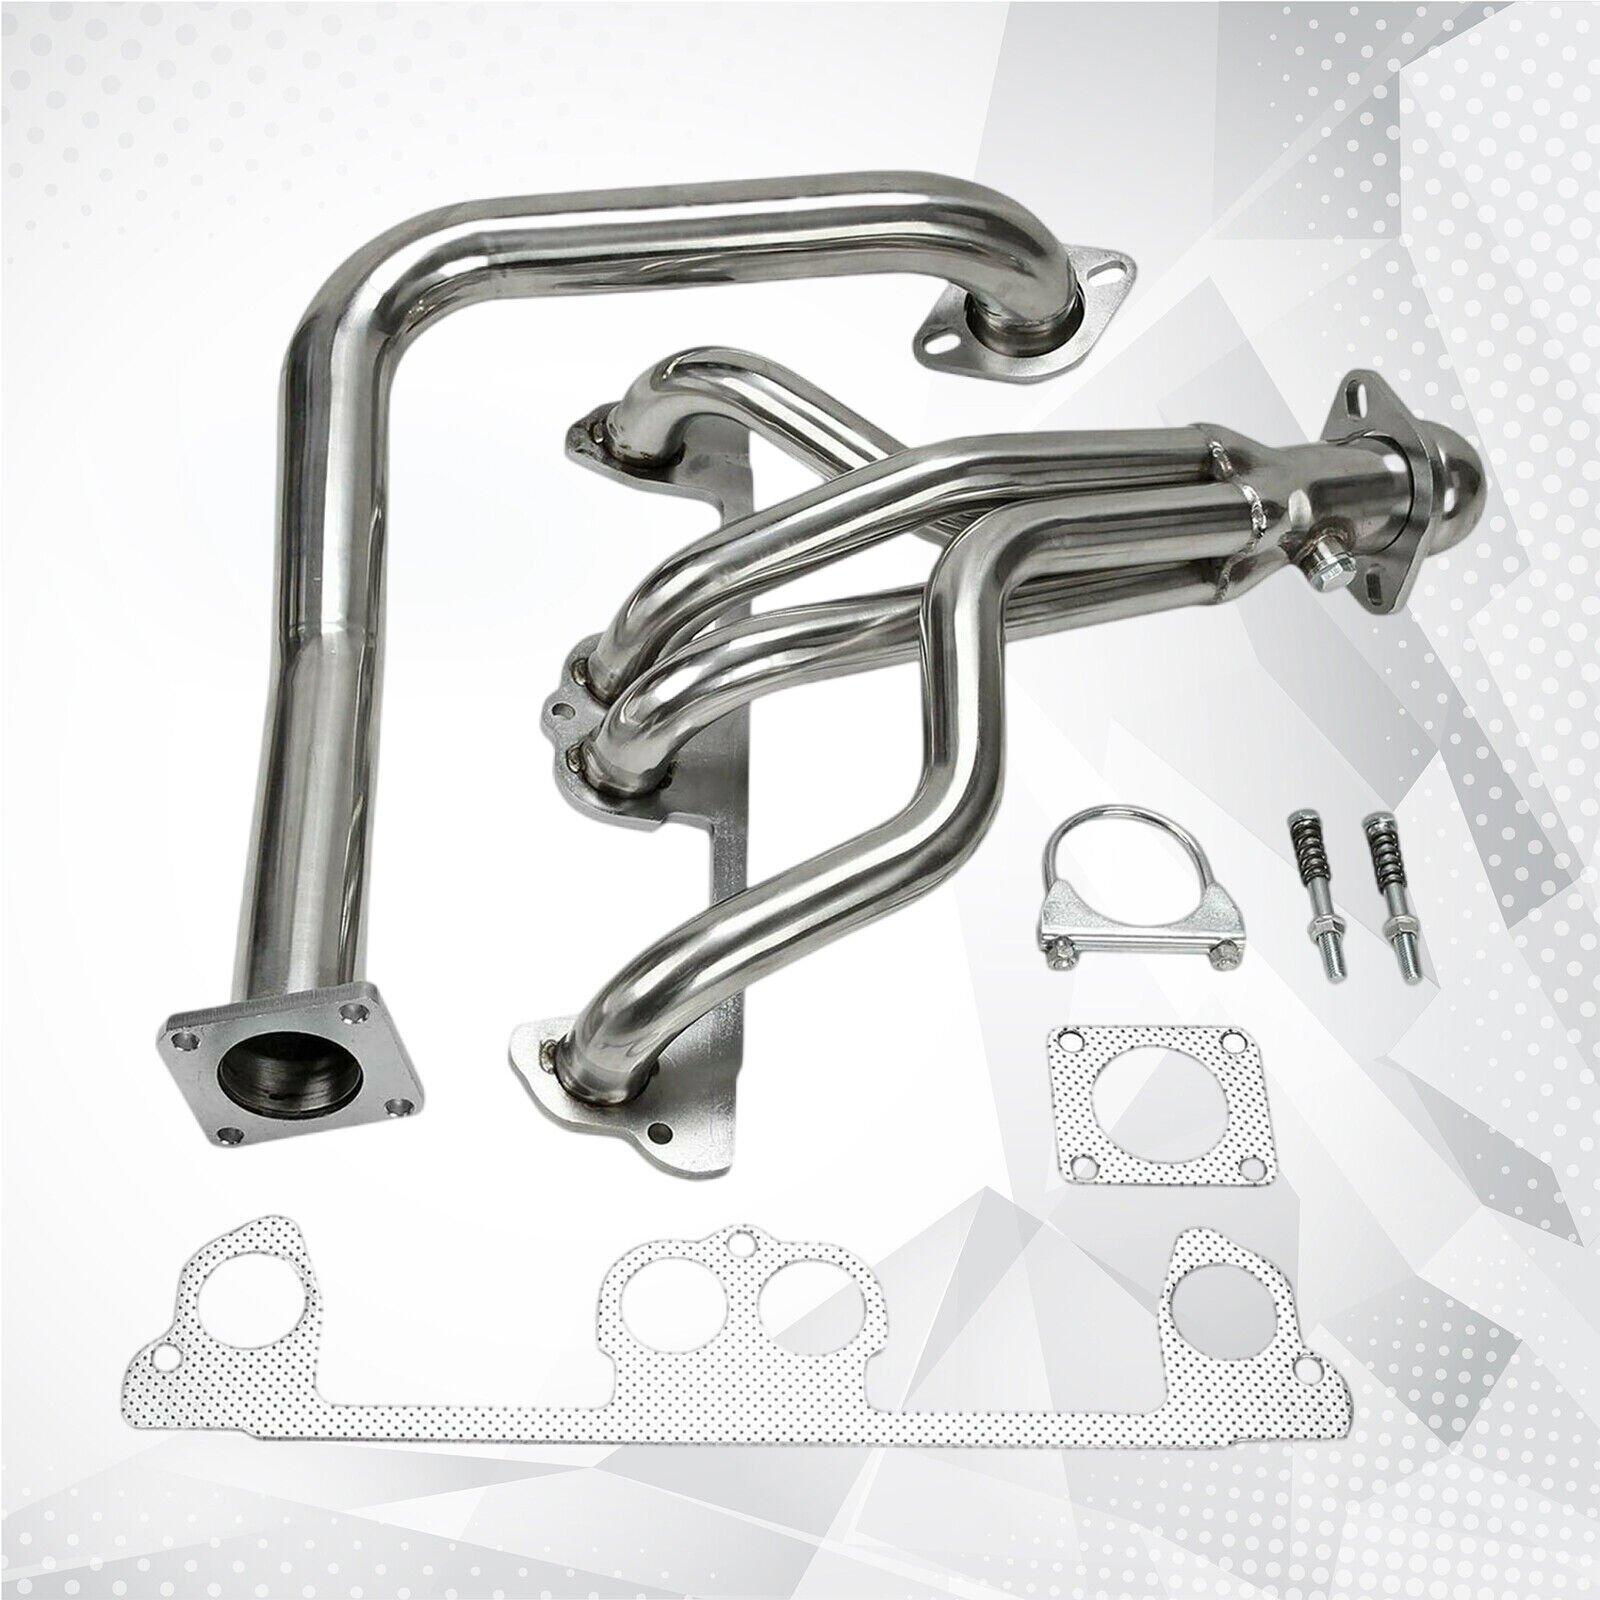 For 1991-95 Jeep Wrangler YJ 2.5L L4 Stainless Steel Exhaust Headers Manifold